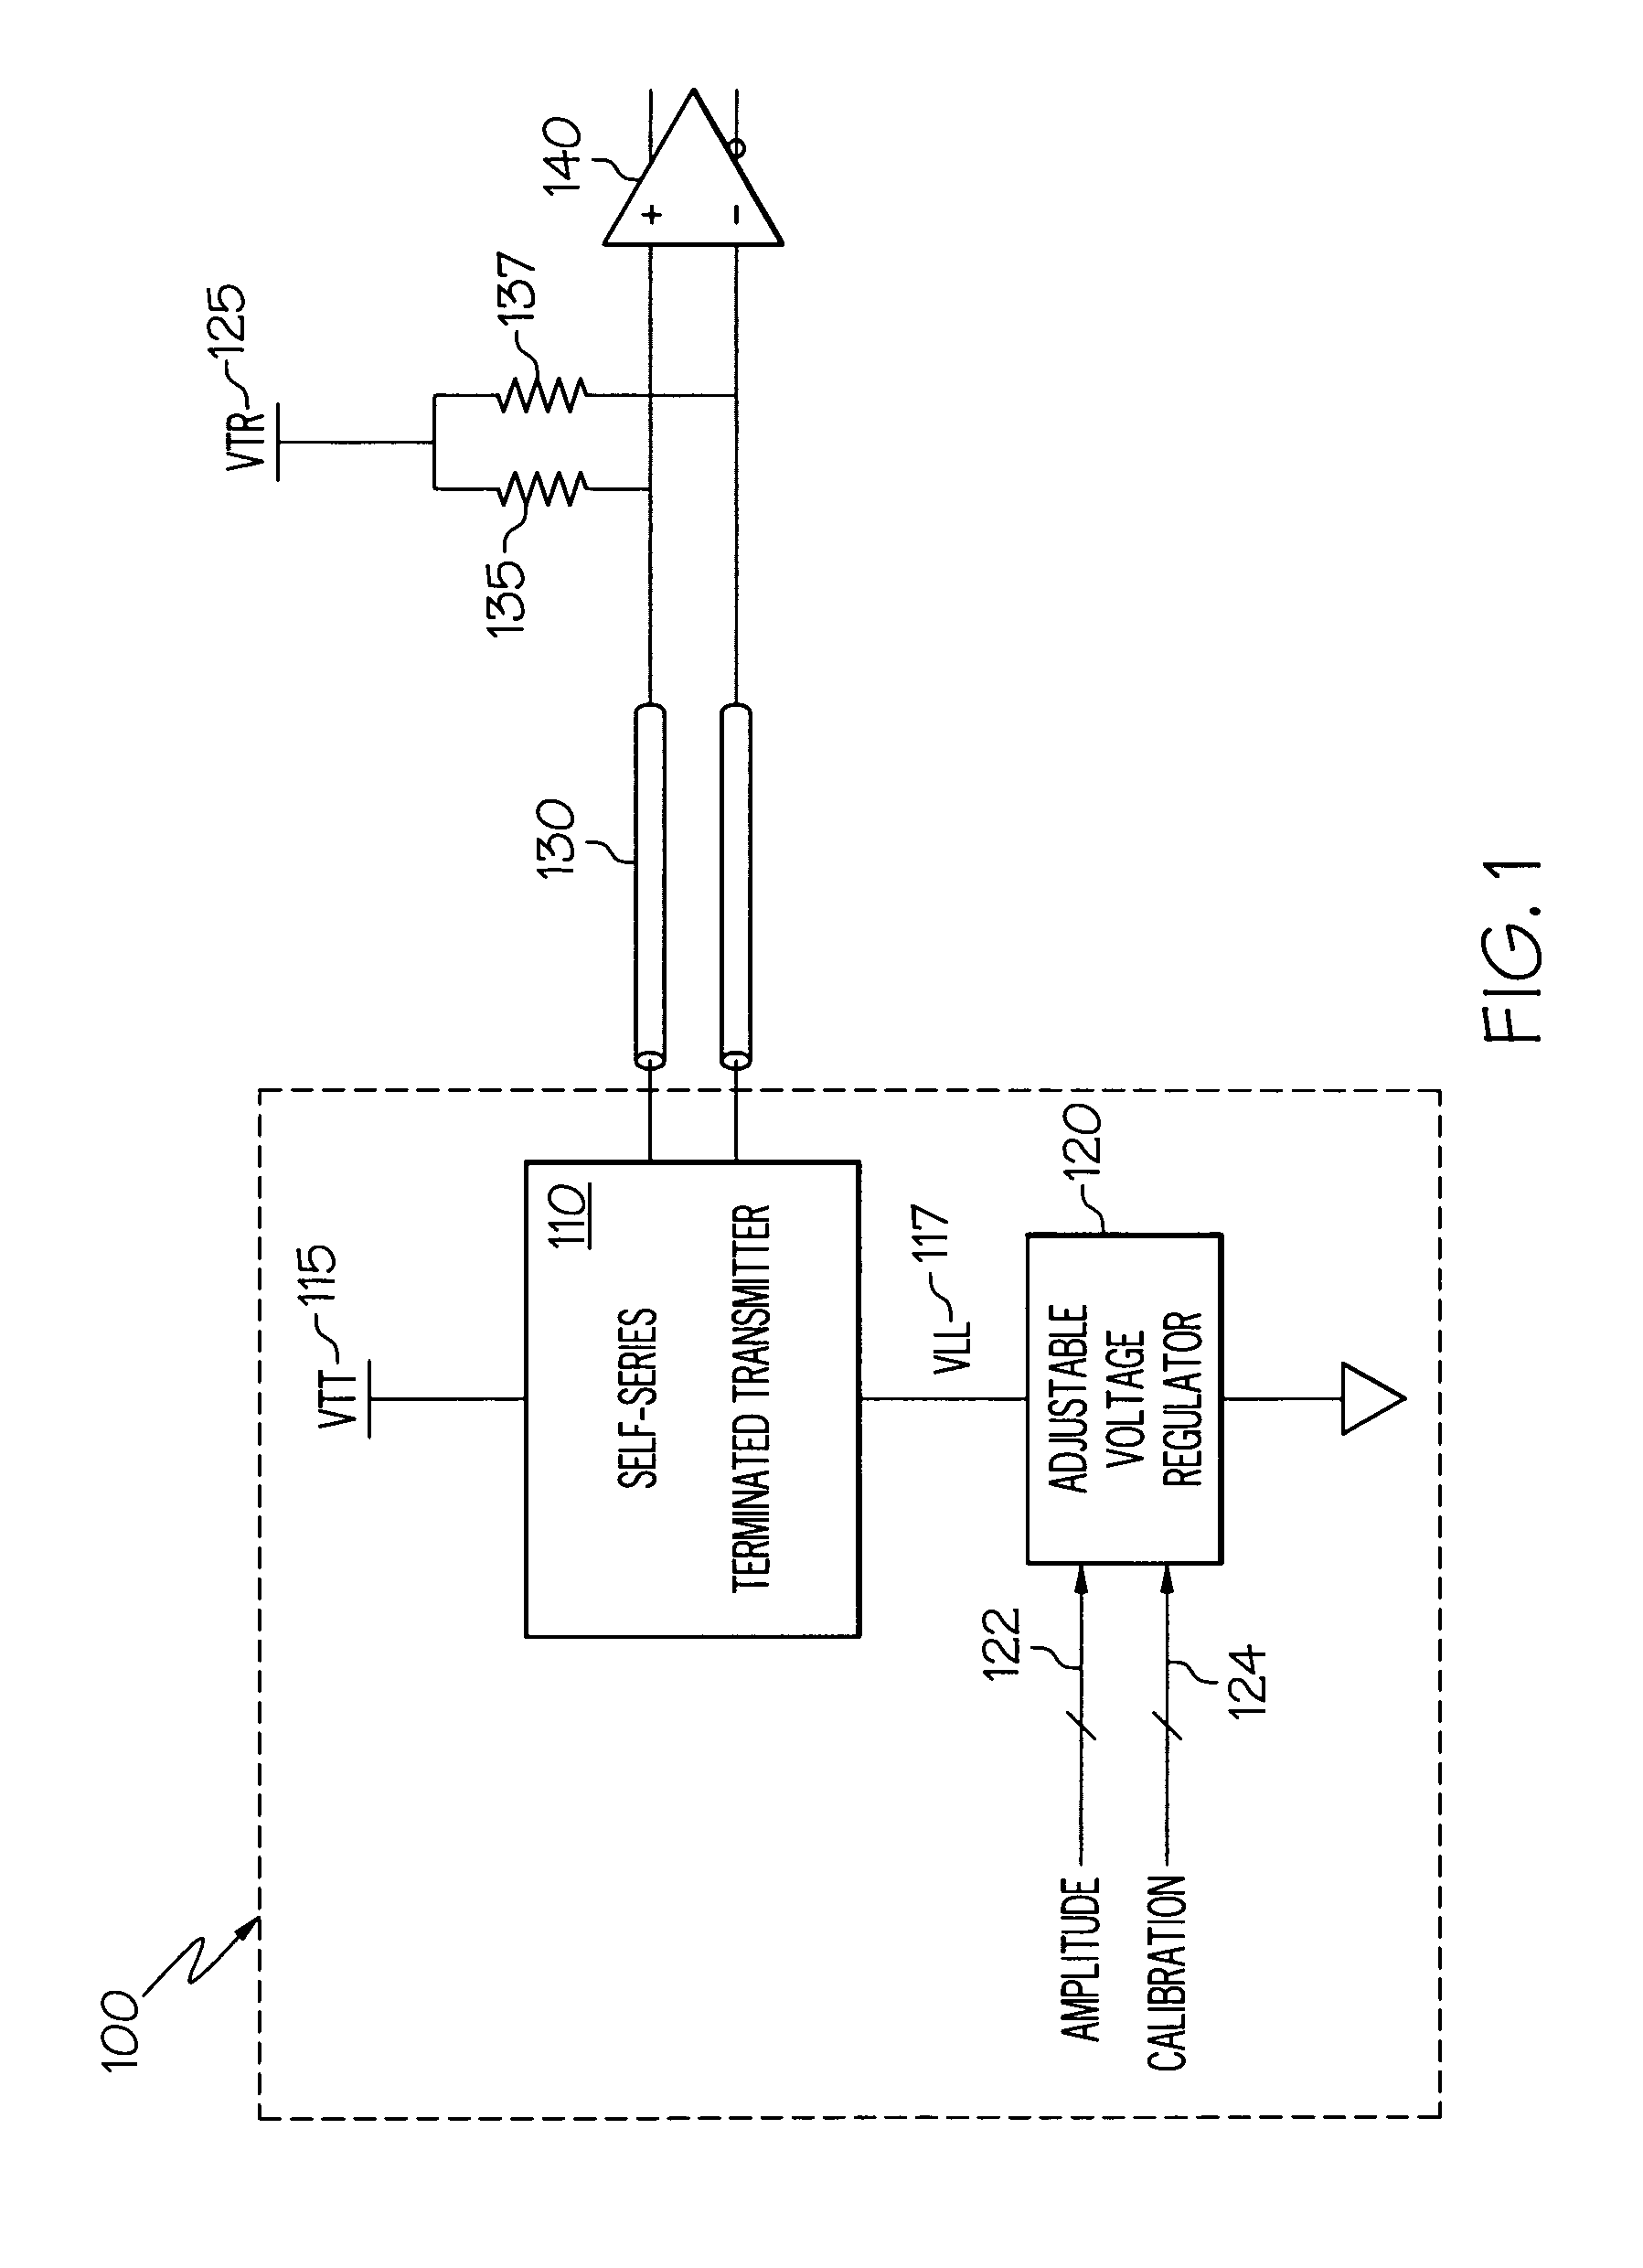 Self series terminated serial link transmitter having segmentation for amplitude, pre-emphasis, and slew rate control and voltage regulation for amplitude accuracy and high voltage protection